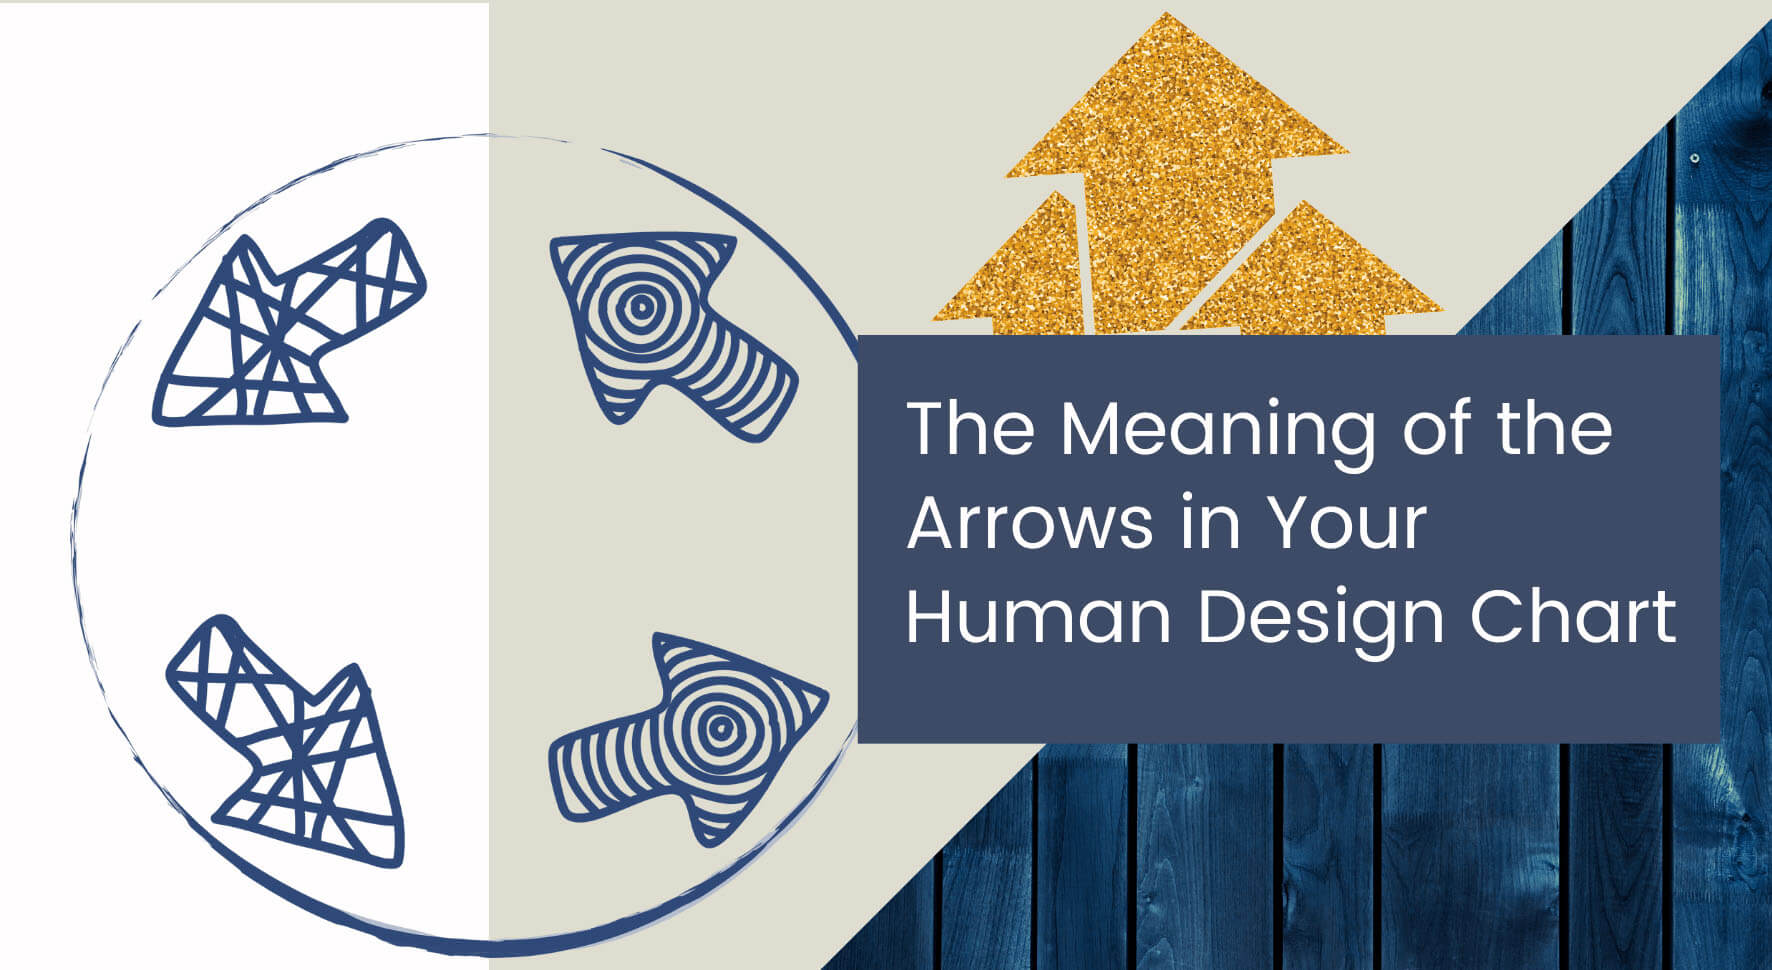 Meaning of the Arrows in Human Design